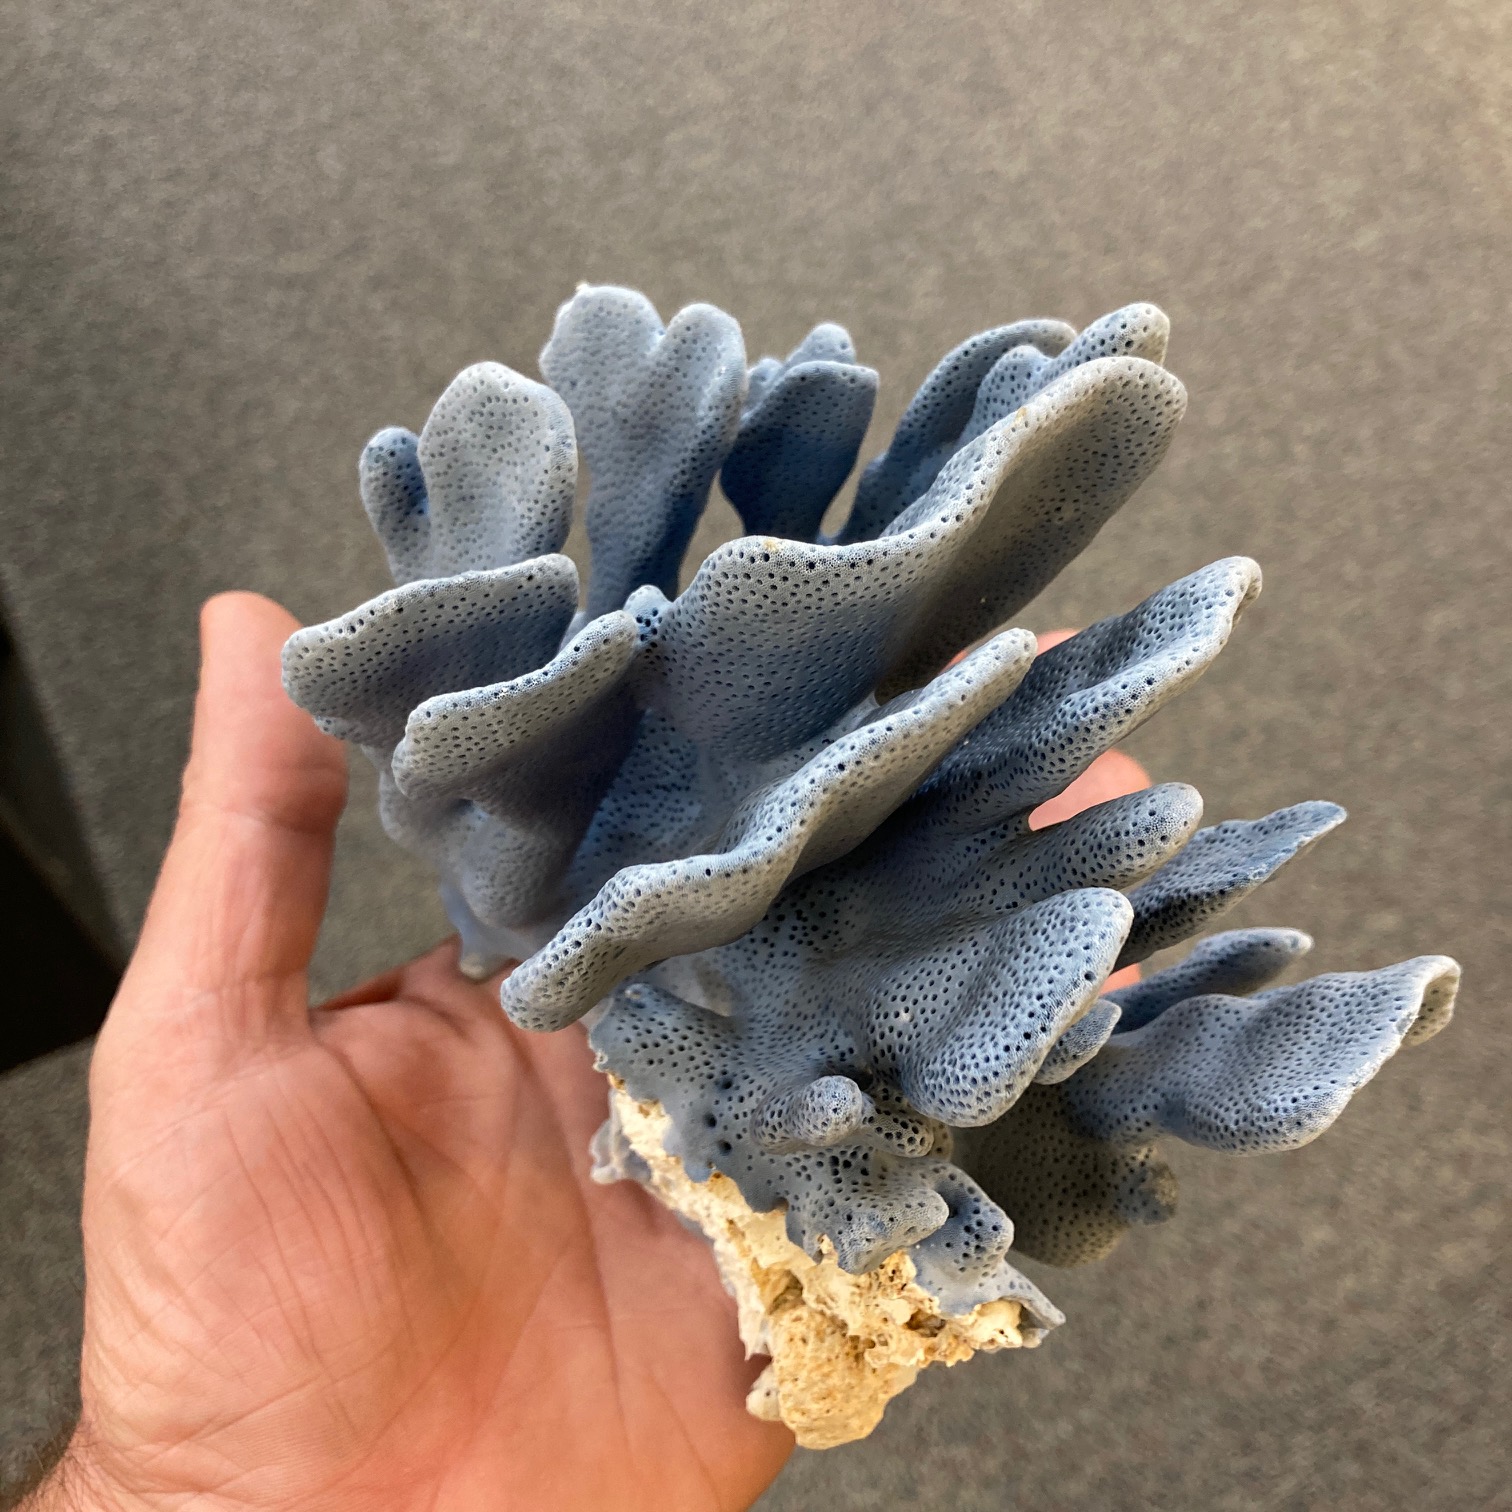 Beautiful Blue Coral Specimen, available for purchase at natur